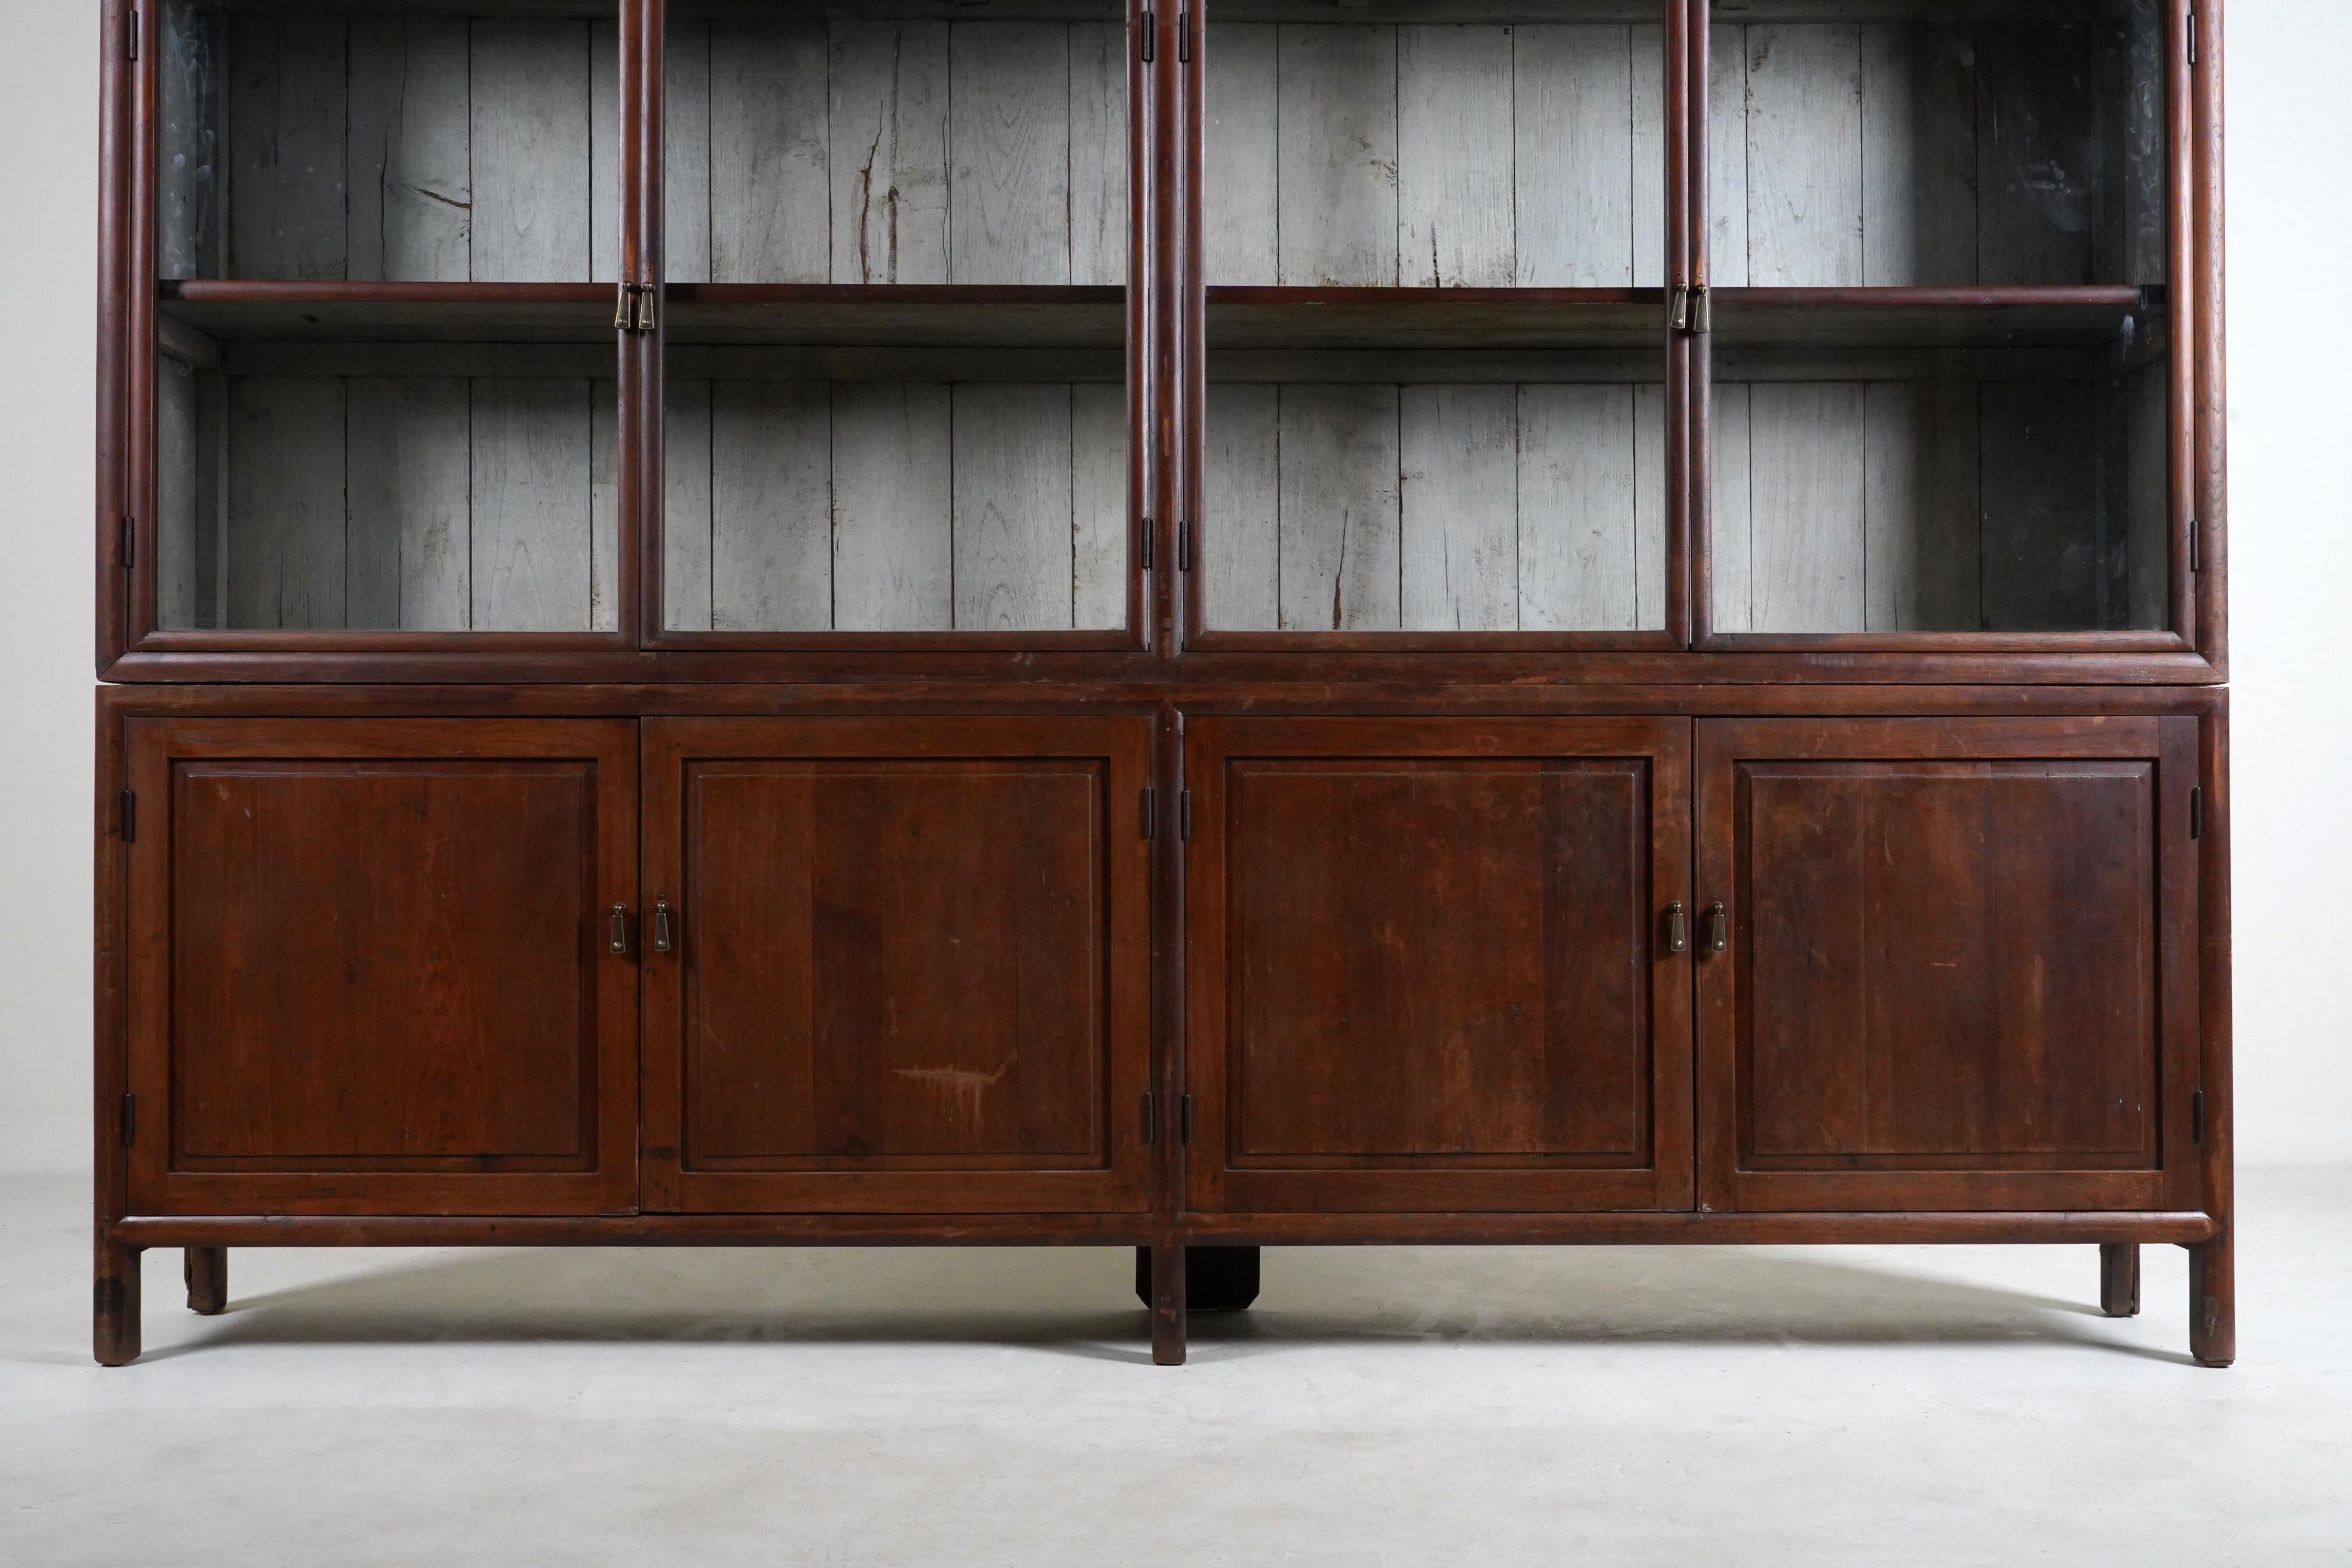 A British Colonial Art Deco Teak Bookcase with Lower Storage  1